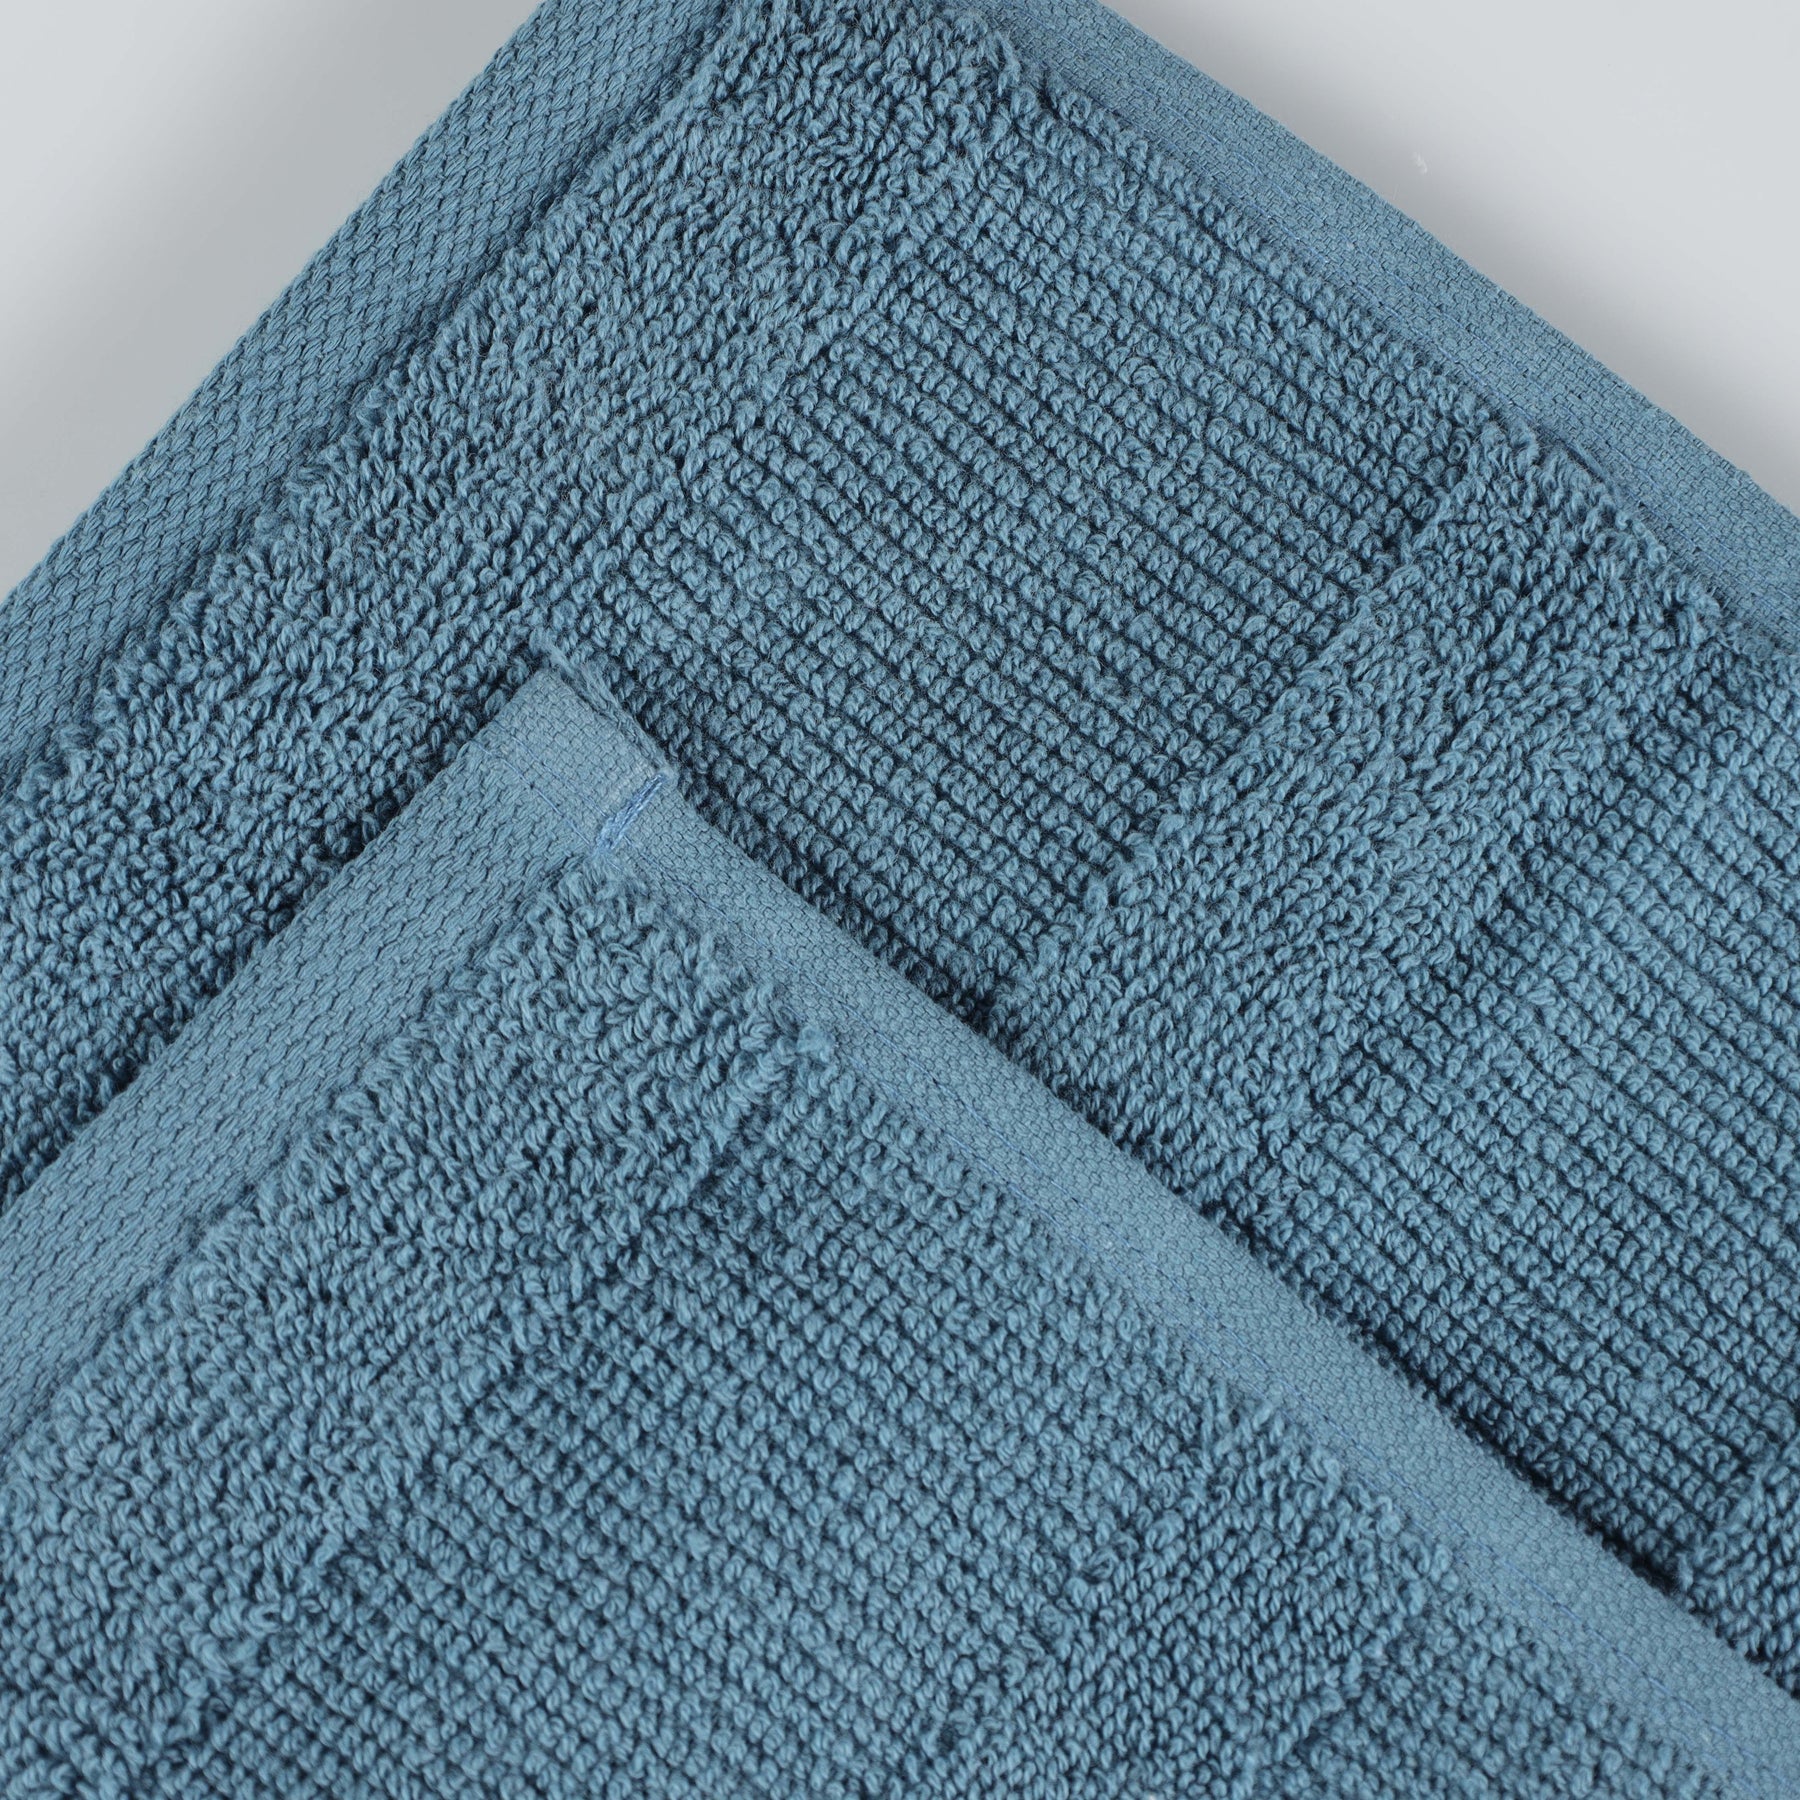 Roma Cotton Ribbed Textured Soft Highly Absorbent Hand Towel - Denim Blue